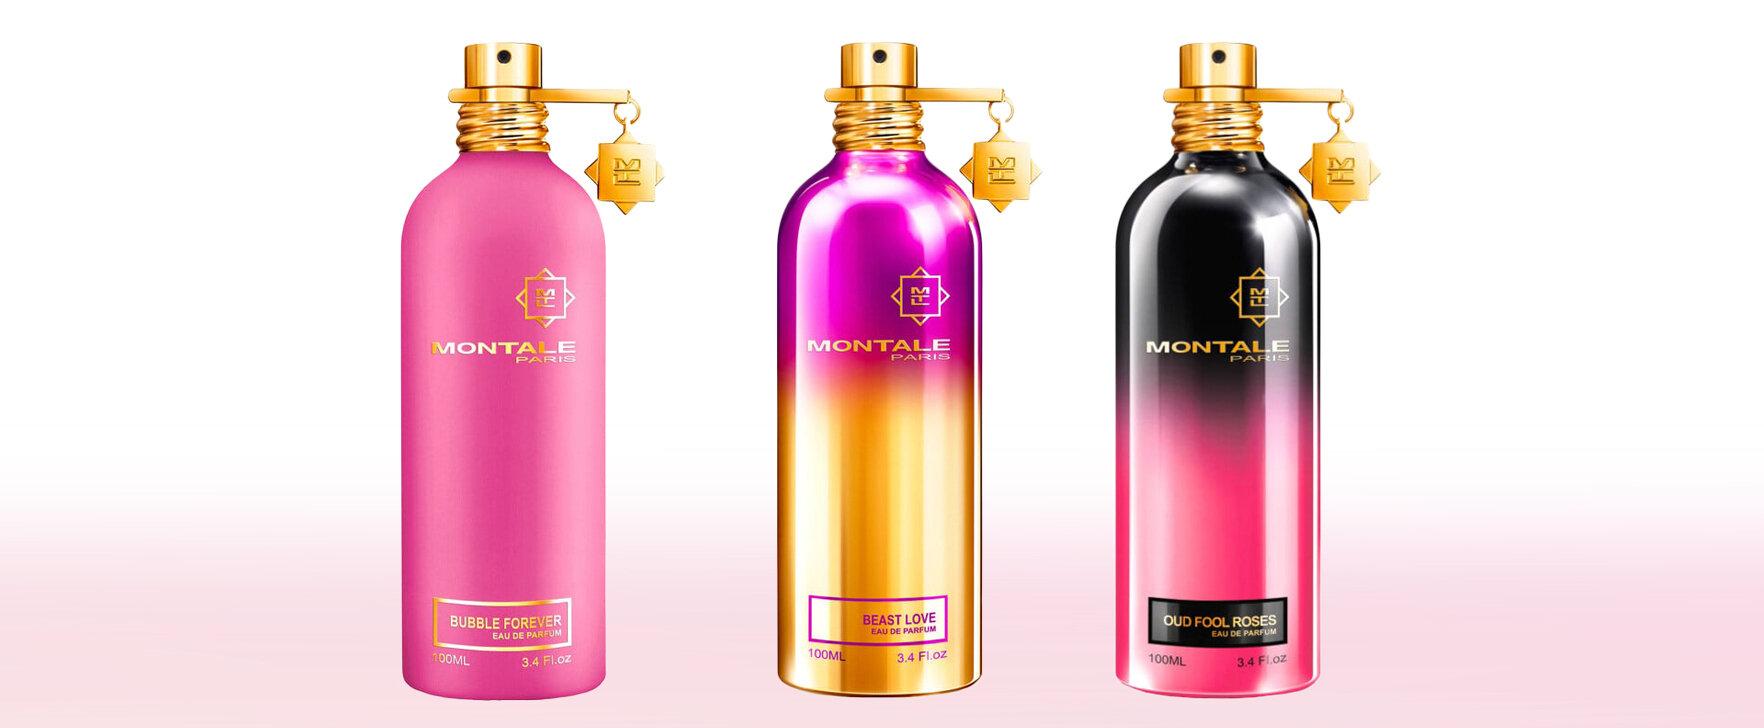 Oud Fool Roses, Bubble Forever and Beast Love: The New Eaux de Parfum From Montale